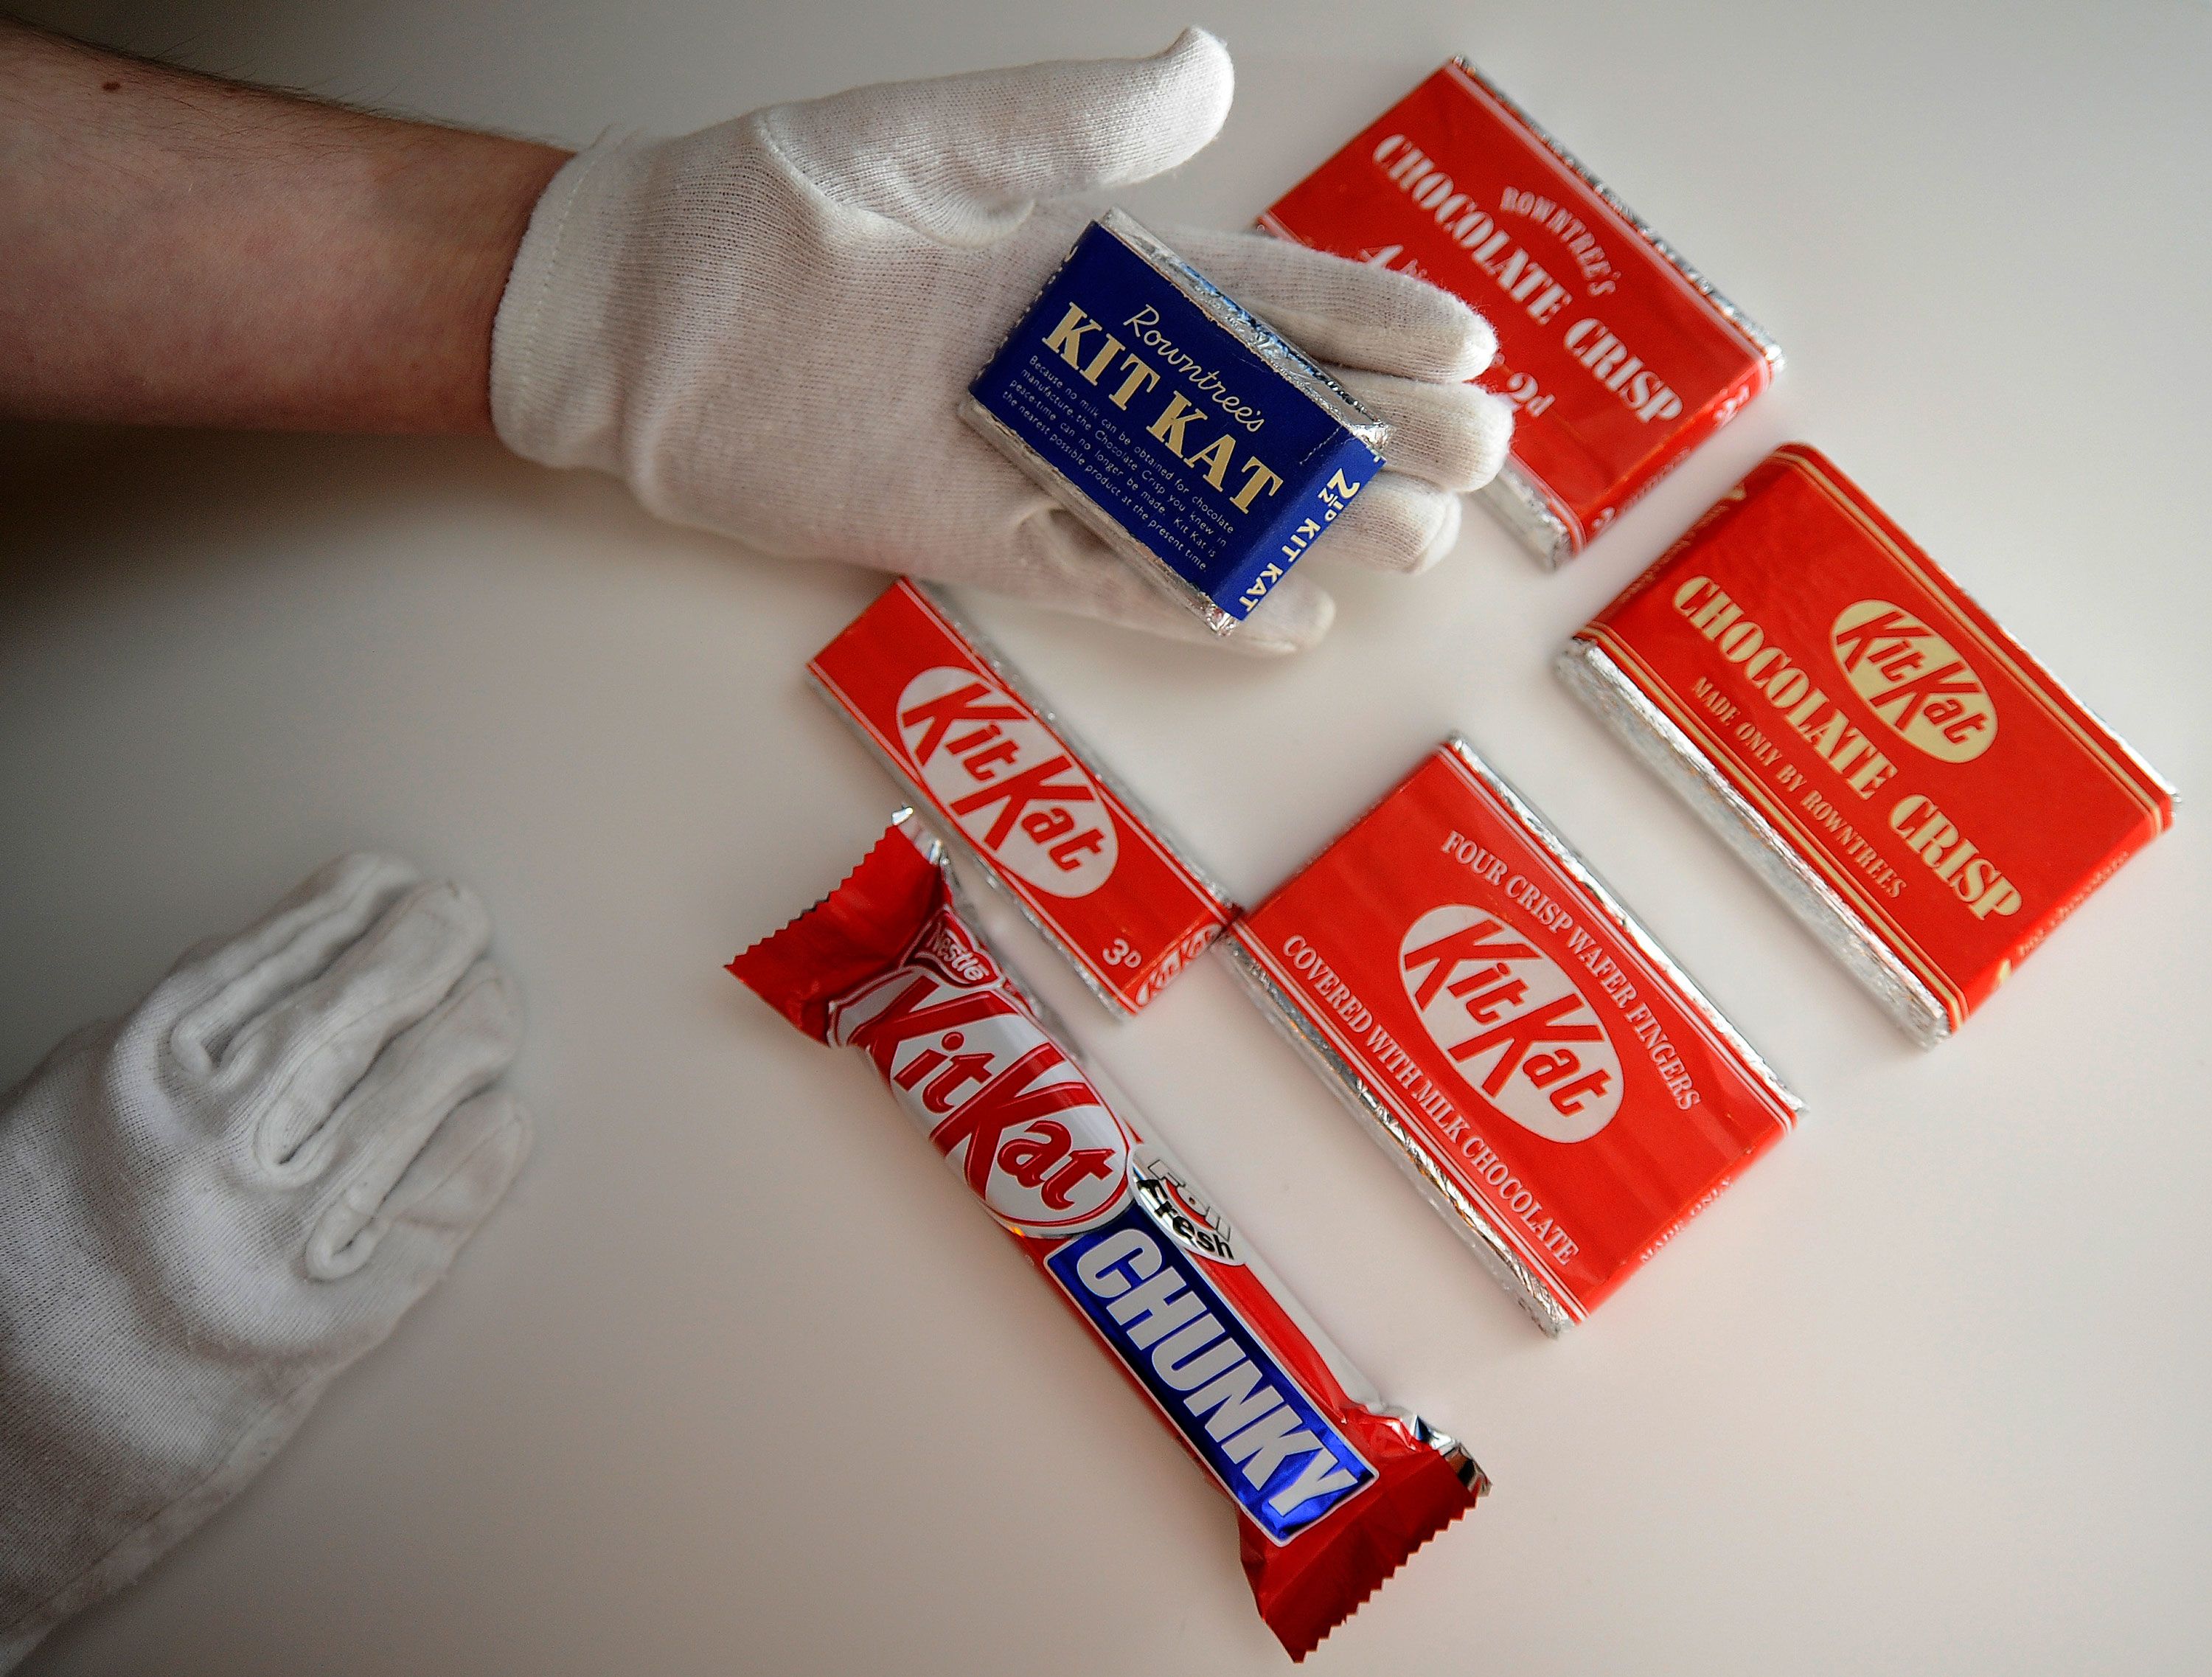 KitKat sweetens Nestle sales with Easter, Valentine's Day comeback